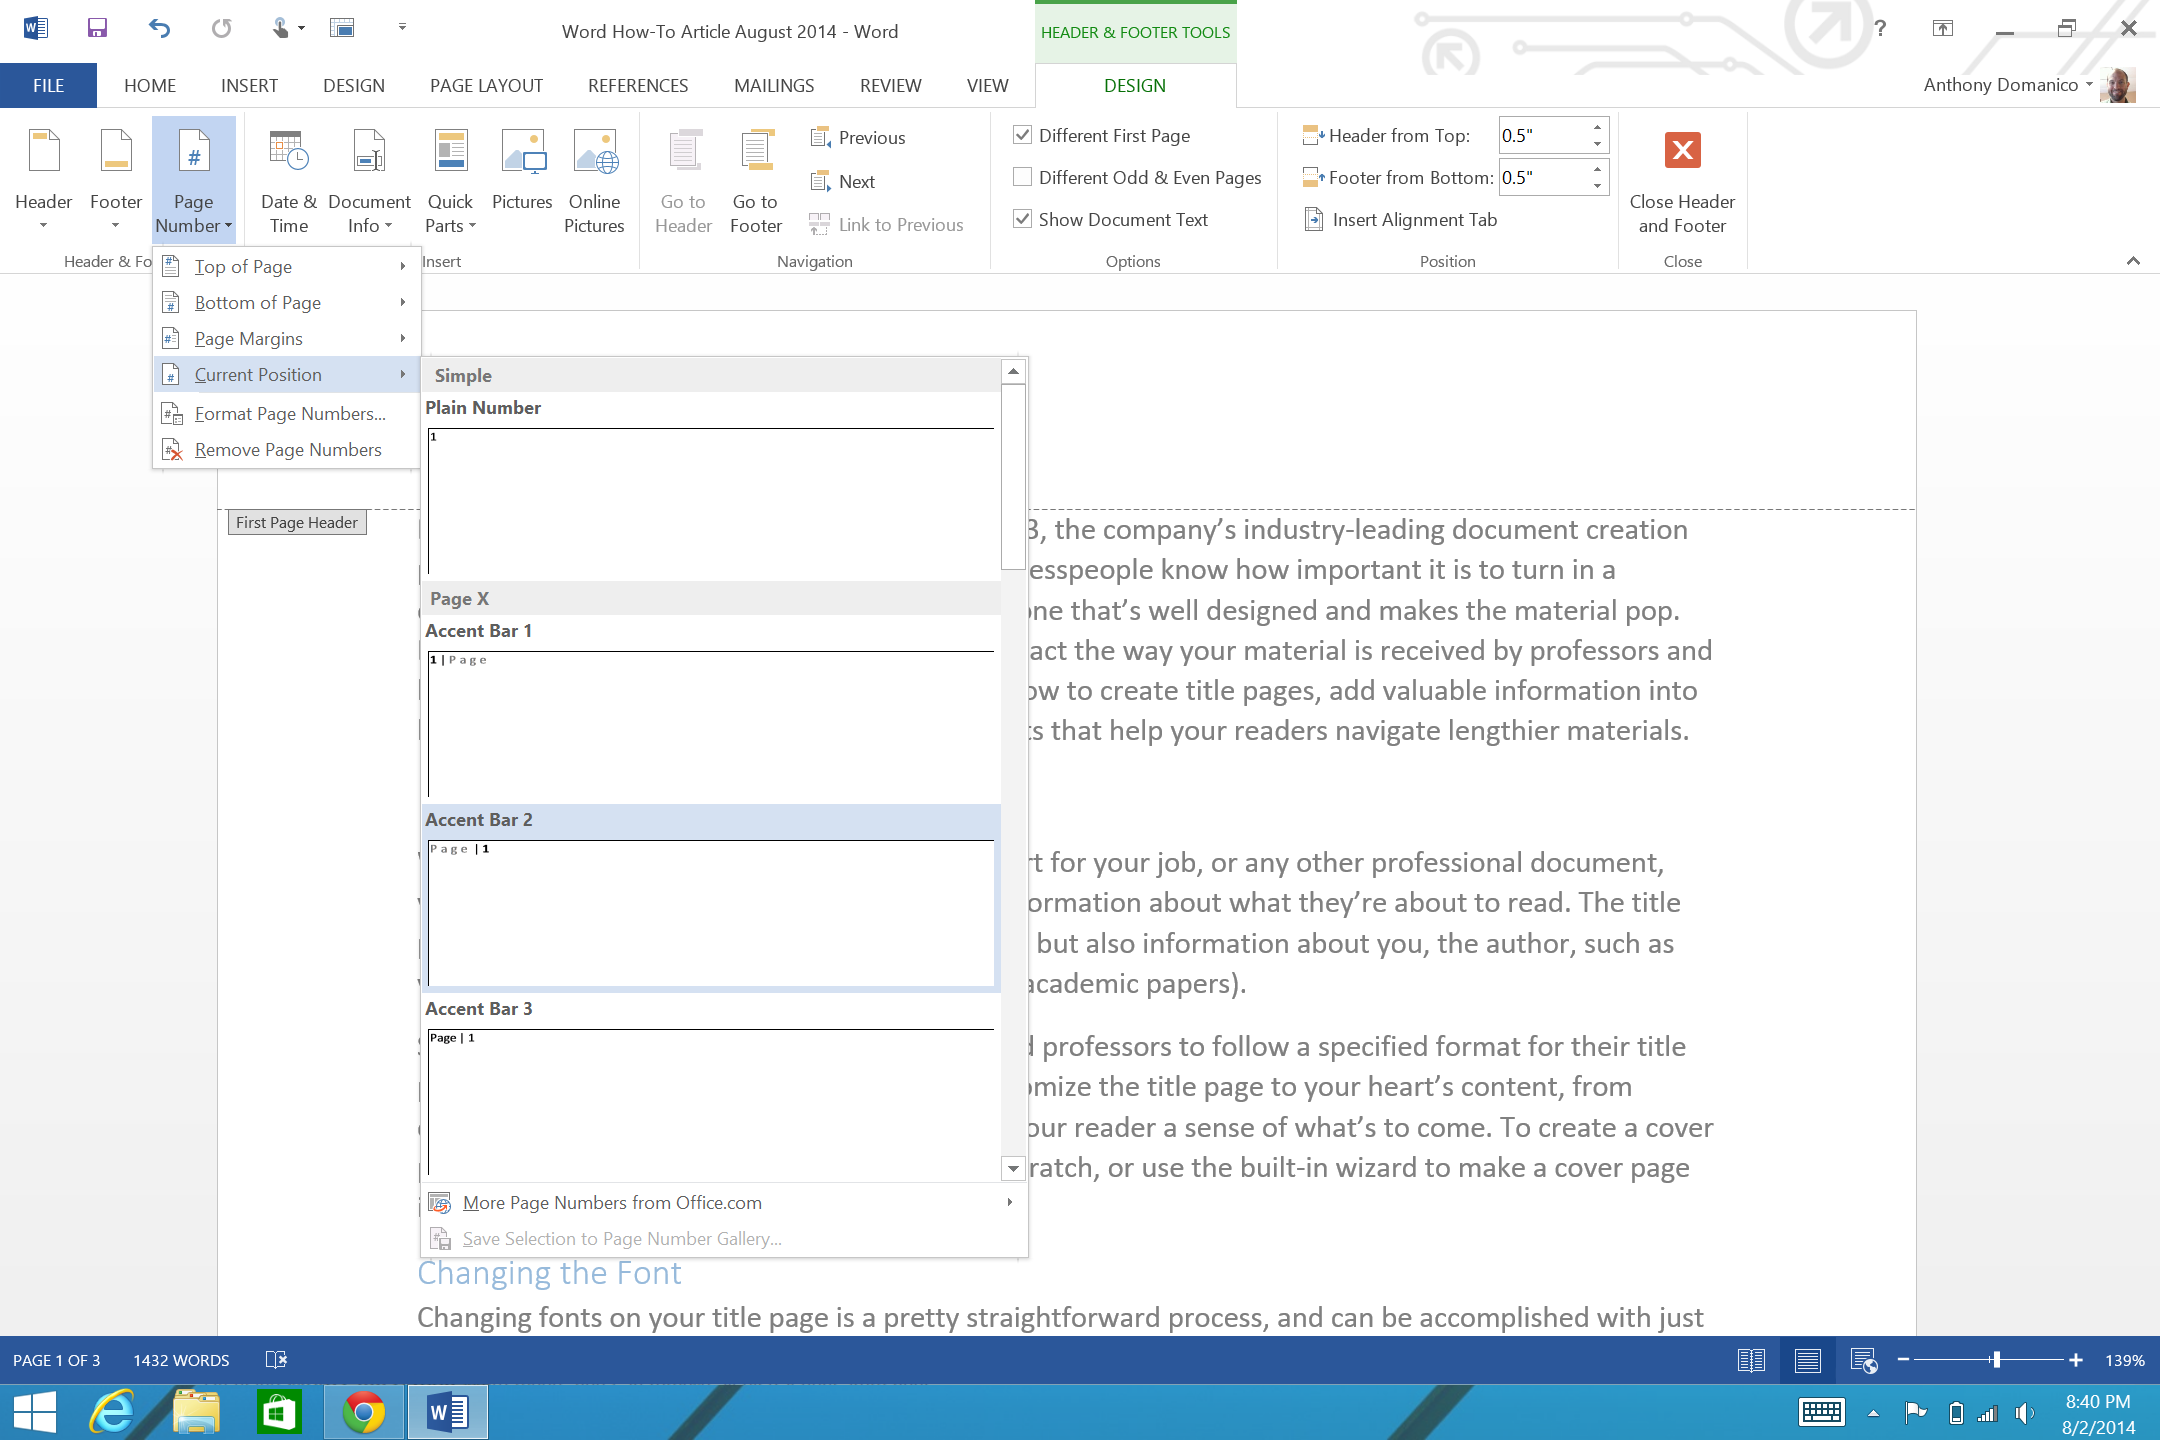 how-to-add-page-numbers-and-a-table-of-contents-to-word-documents-pcworld